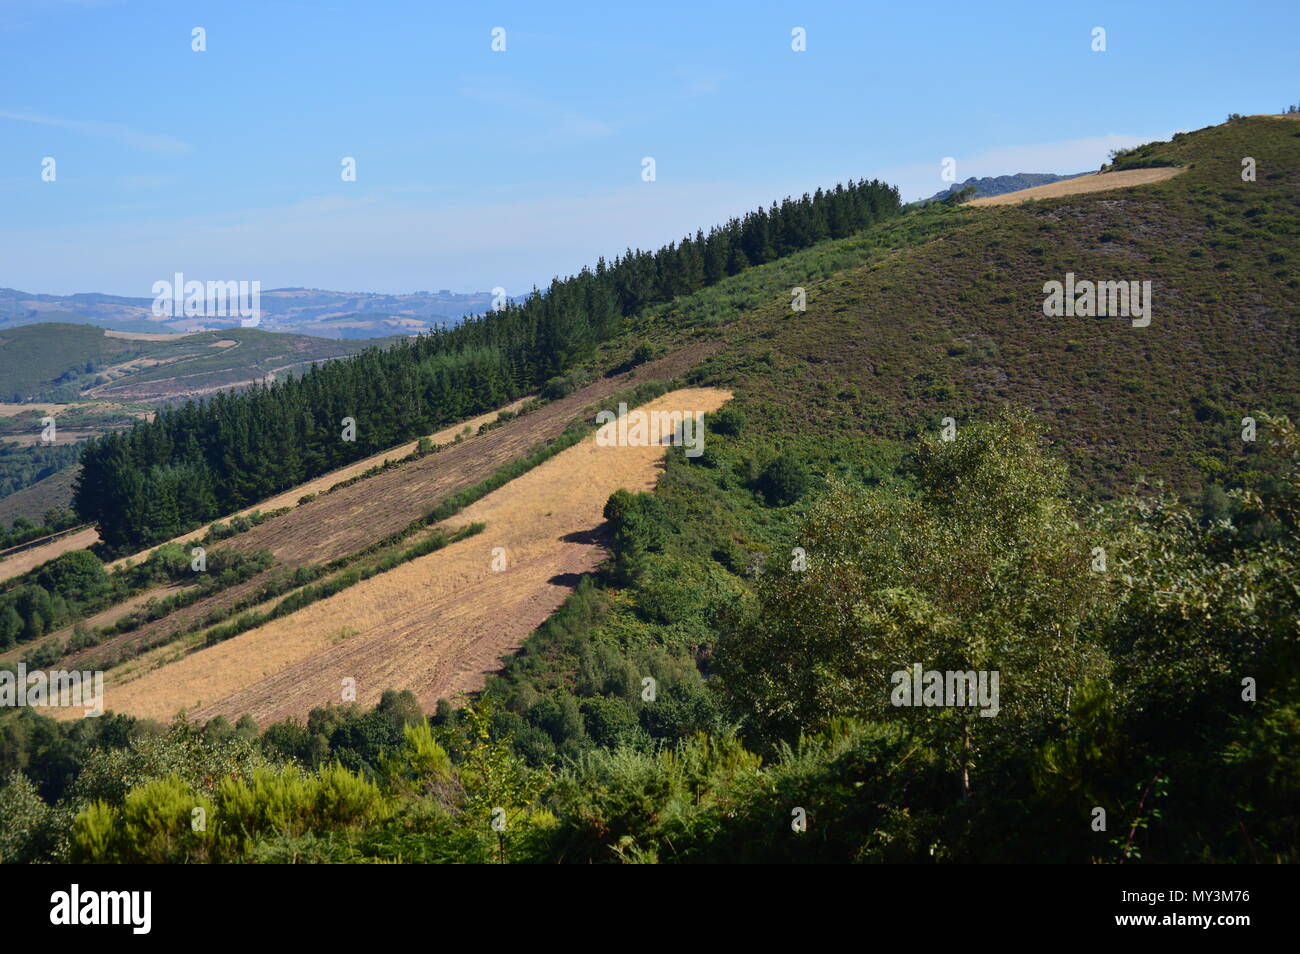 View Of The Landscapes Of The Meadows Of The Mountains Of Galicia. Travel Flowers Nature. August 18, 2016. Rebedul, Becerrea Lugo Galicia Spain. Stock Photo